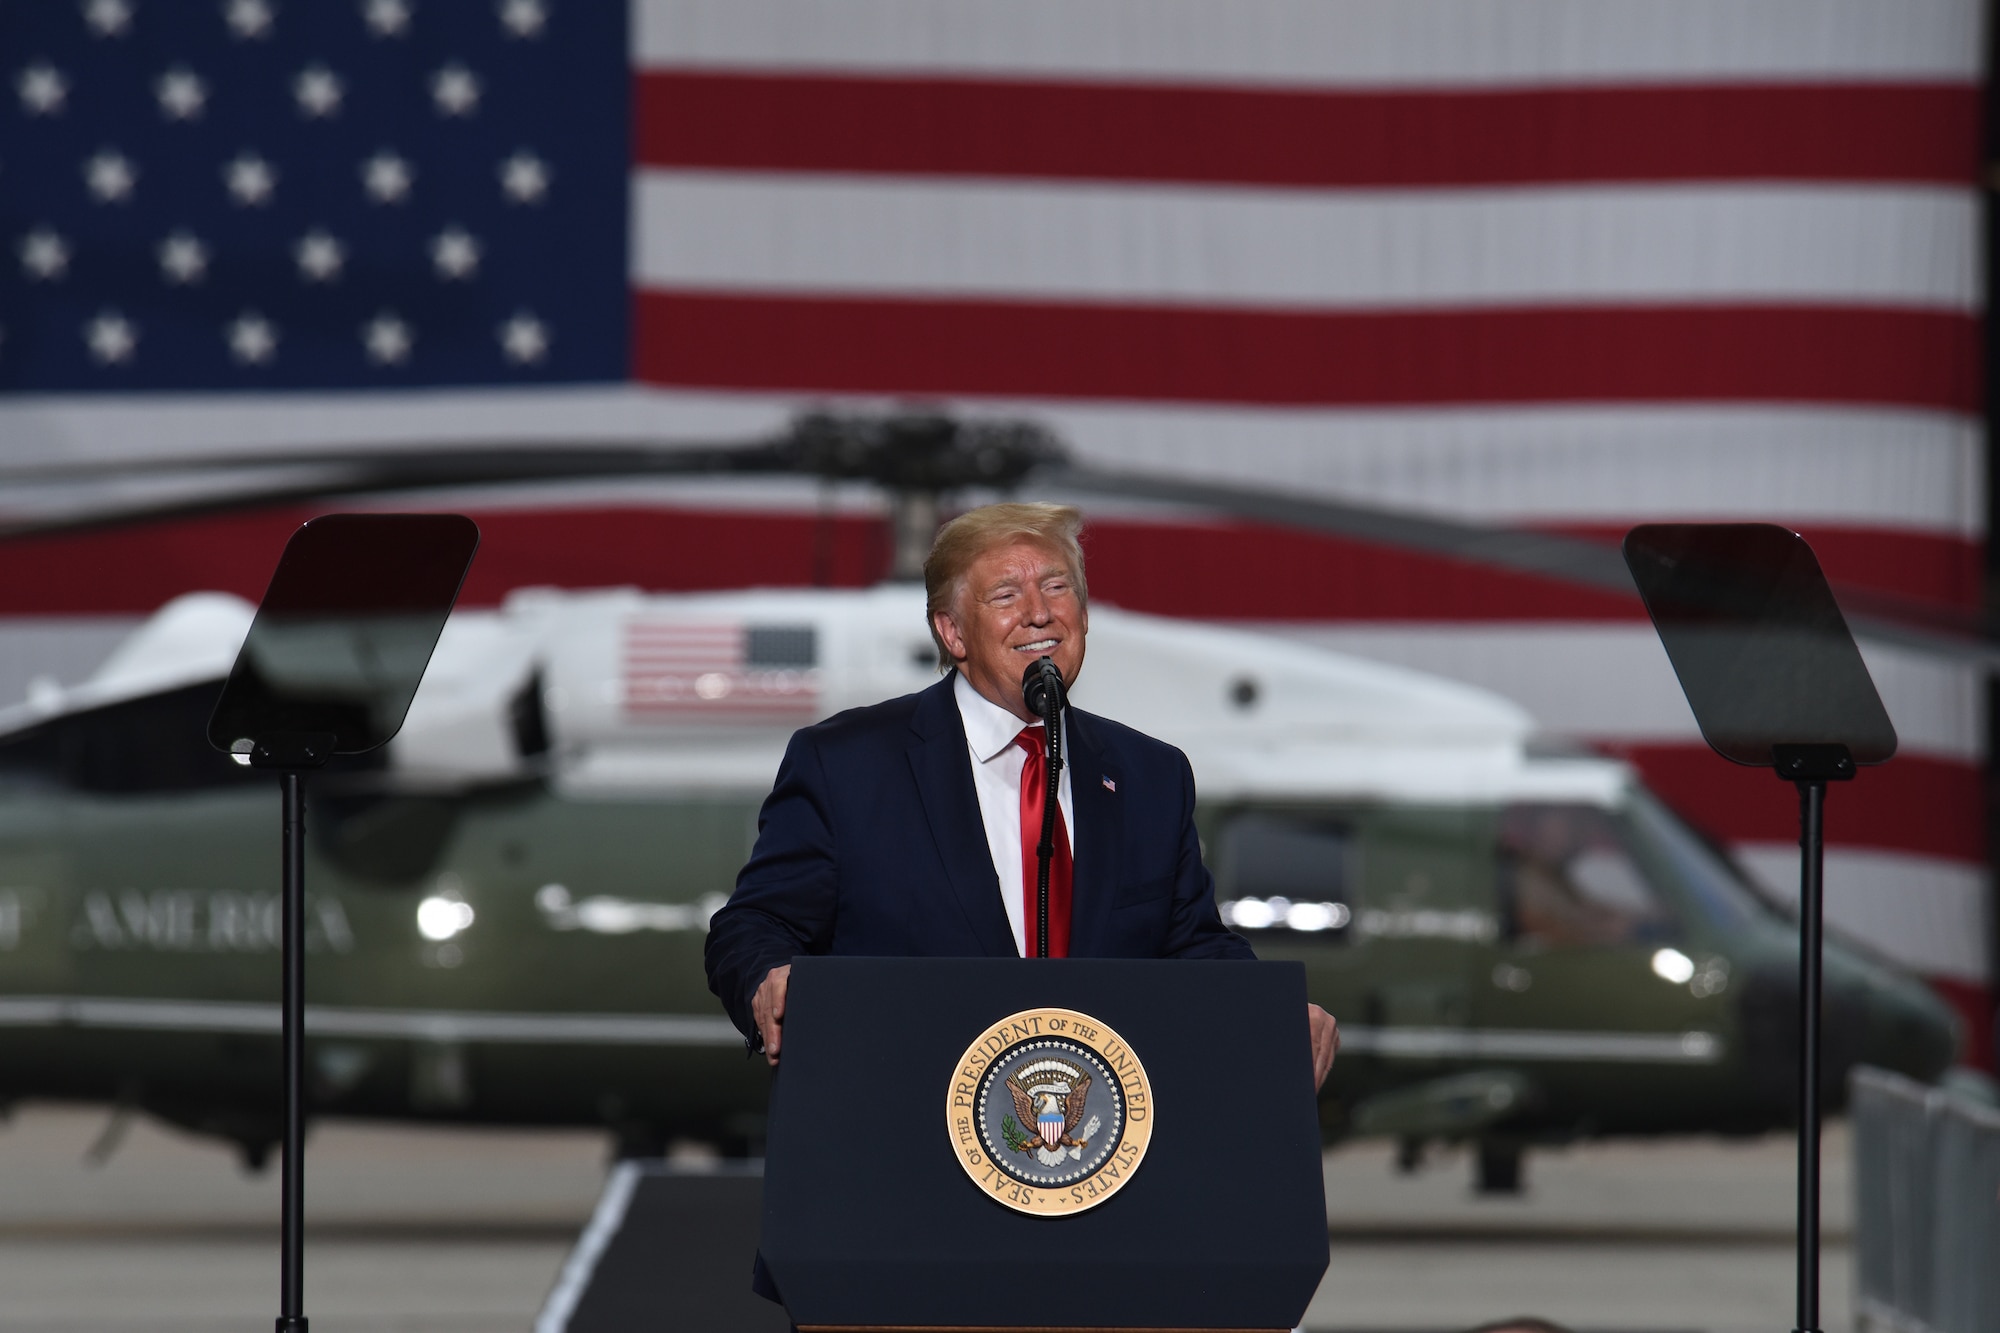 President Donald J. Trump addresses service members and their families during an event at Osan Air Base, Republic of Korea, June 30, 2019. U.S. Forces Korea supports a wide array of joint and combined operations giving service members regular training interactions with others services and multi-national forces. (U.S. Air Force photo by Staff Sgt. Sergio A. Gamboa)